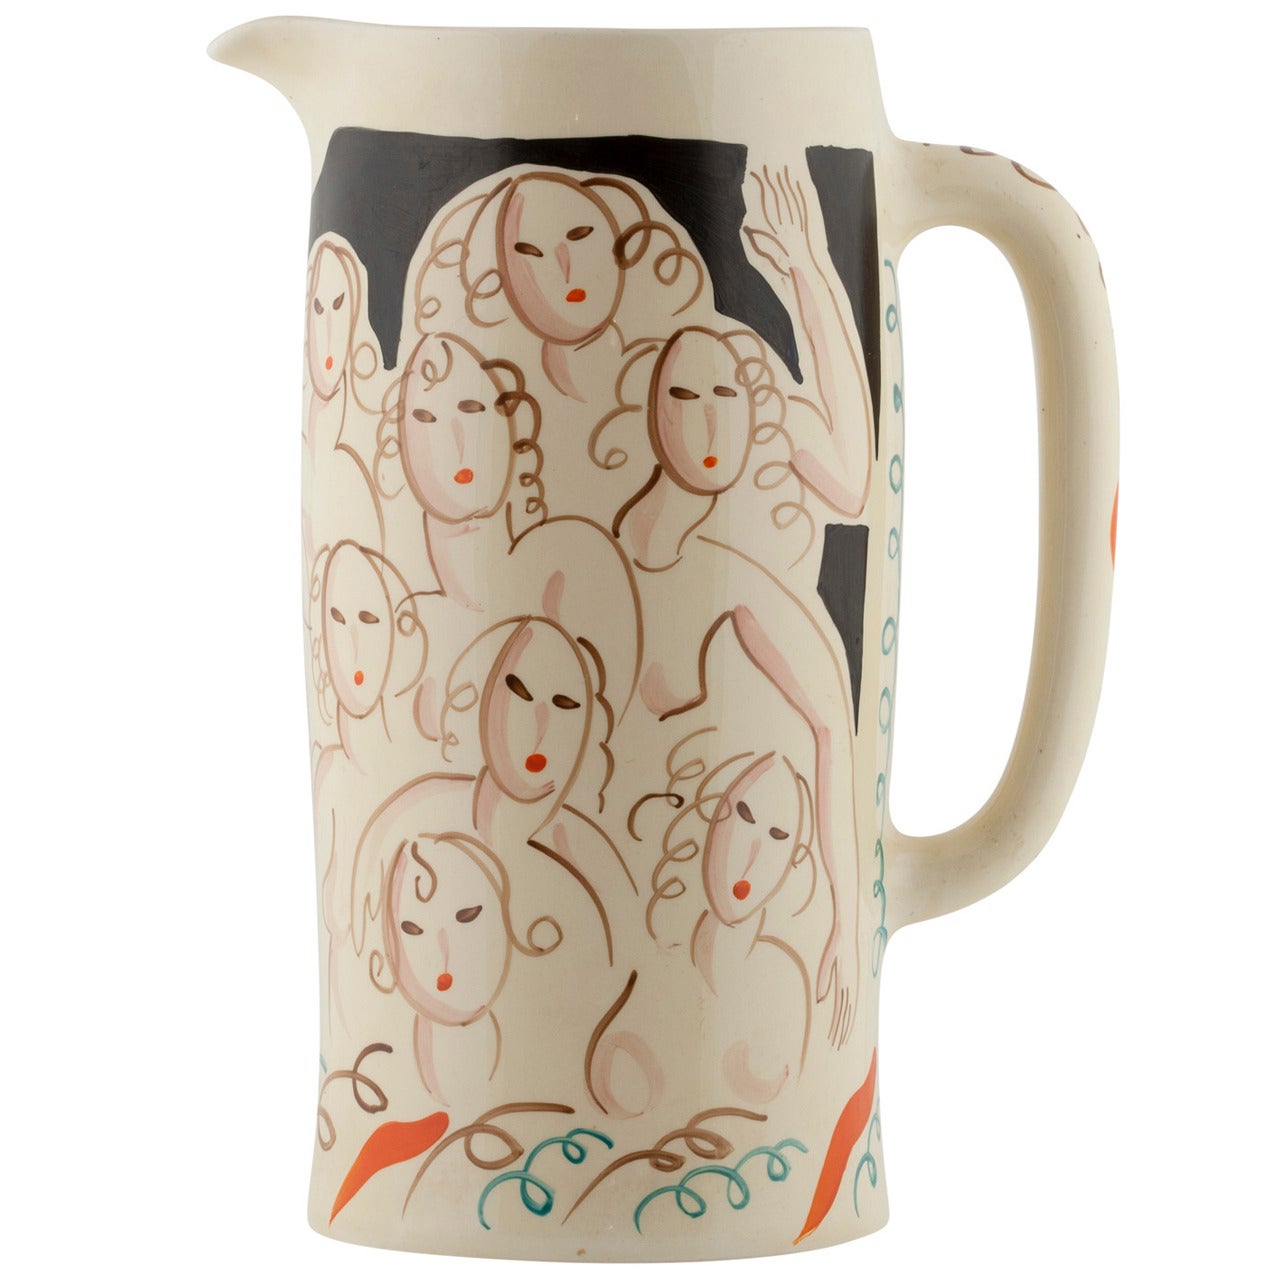 Clarice Cliff Jug with Fair Ladies by Dame Laura Knight, 1934 For Sale